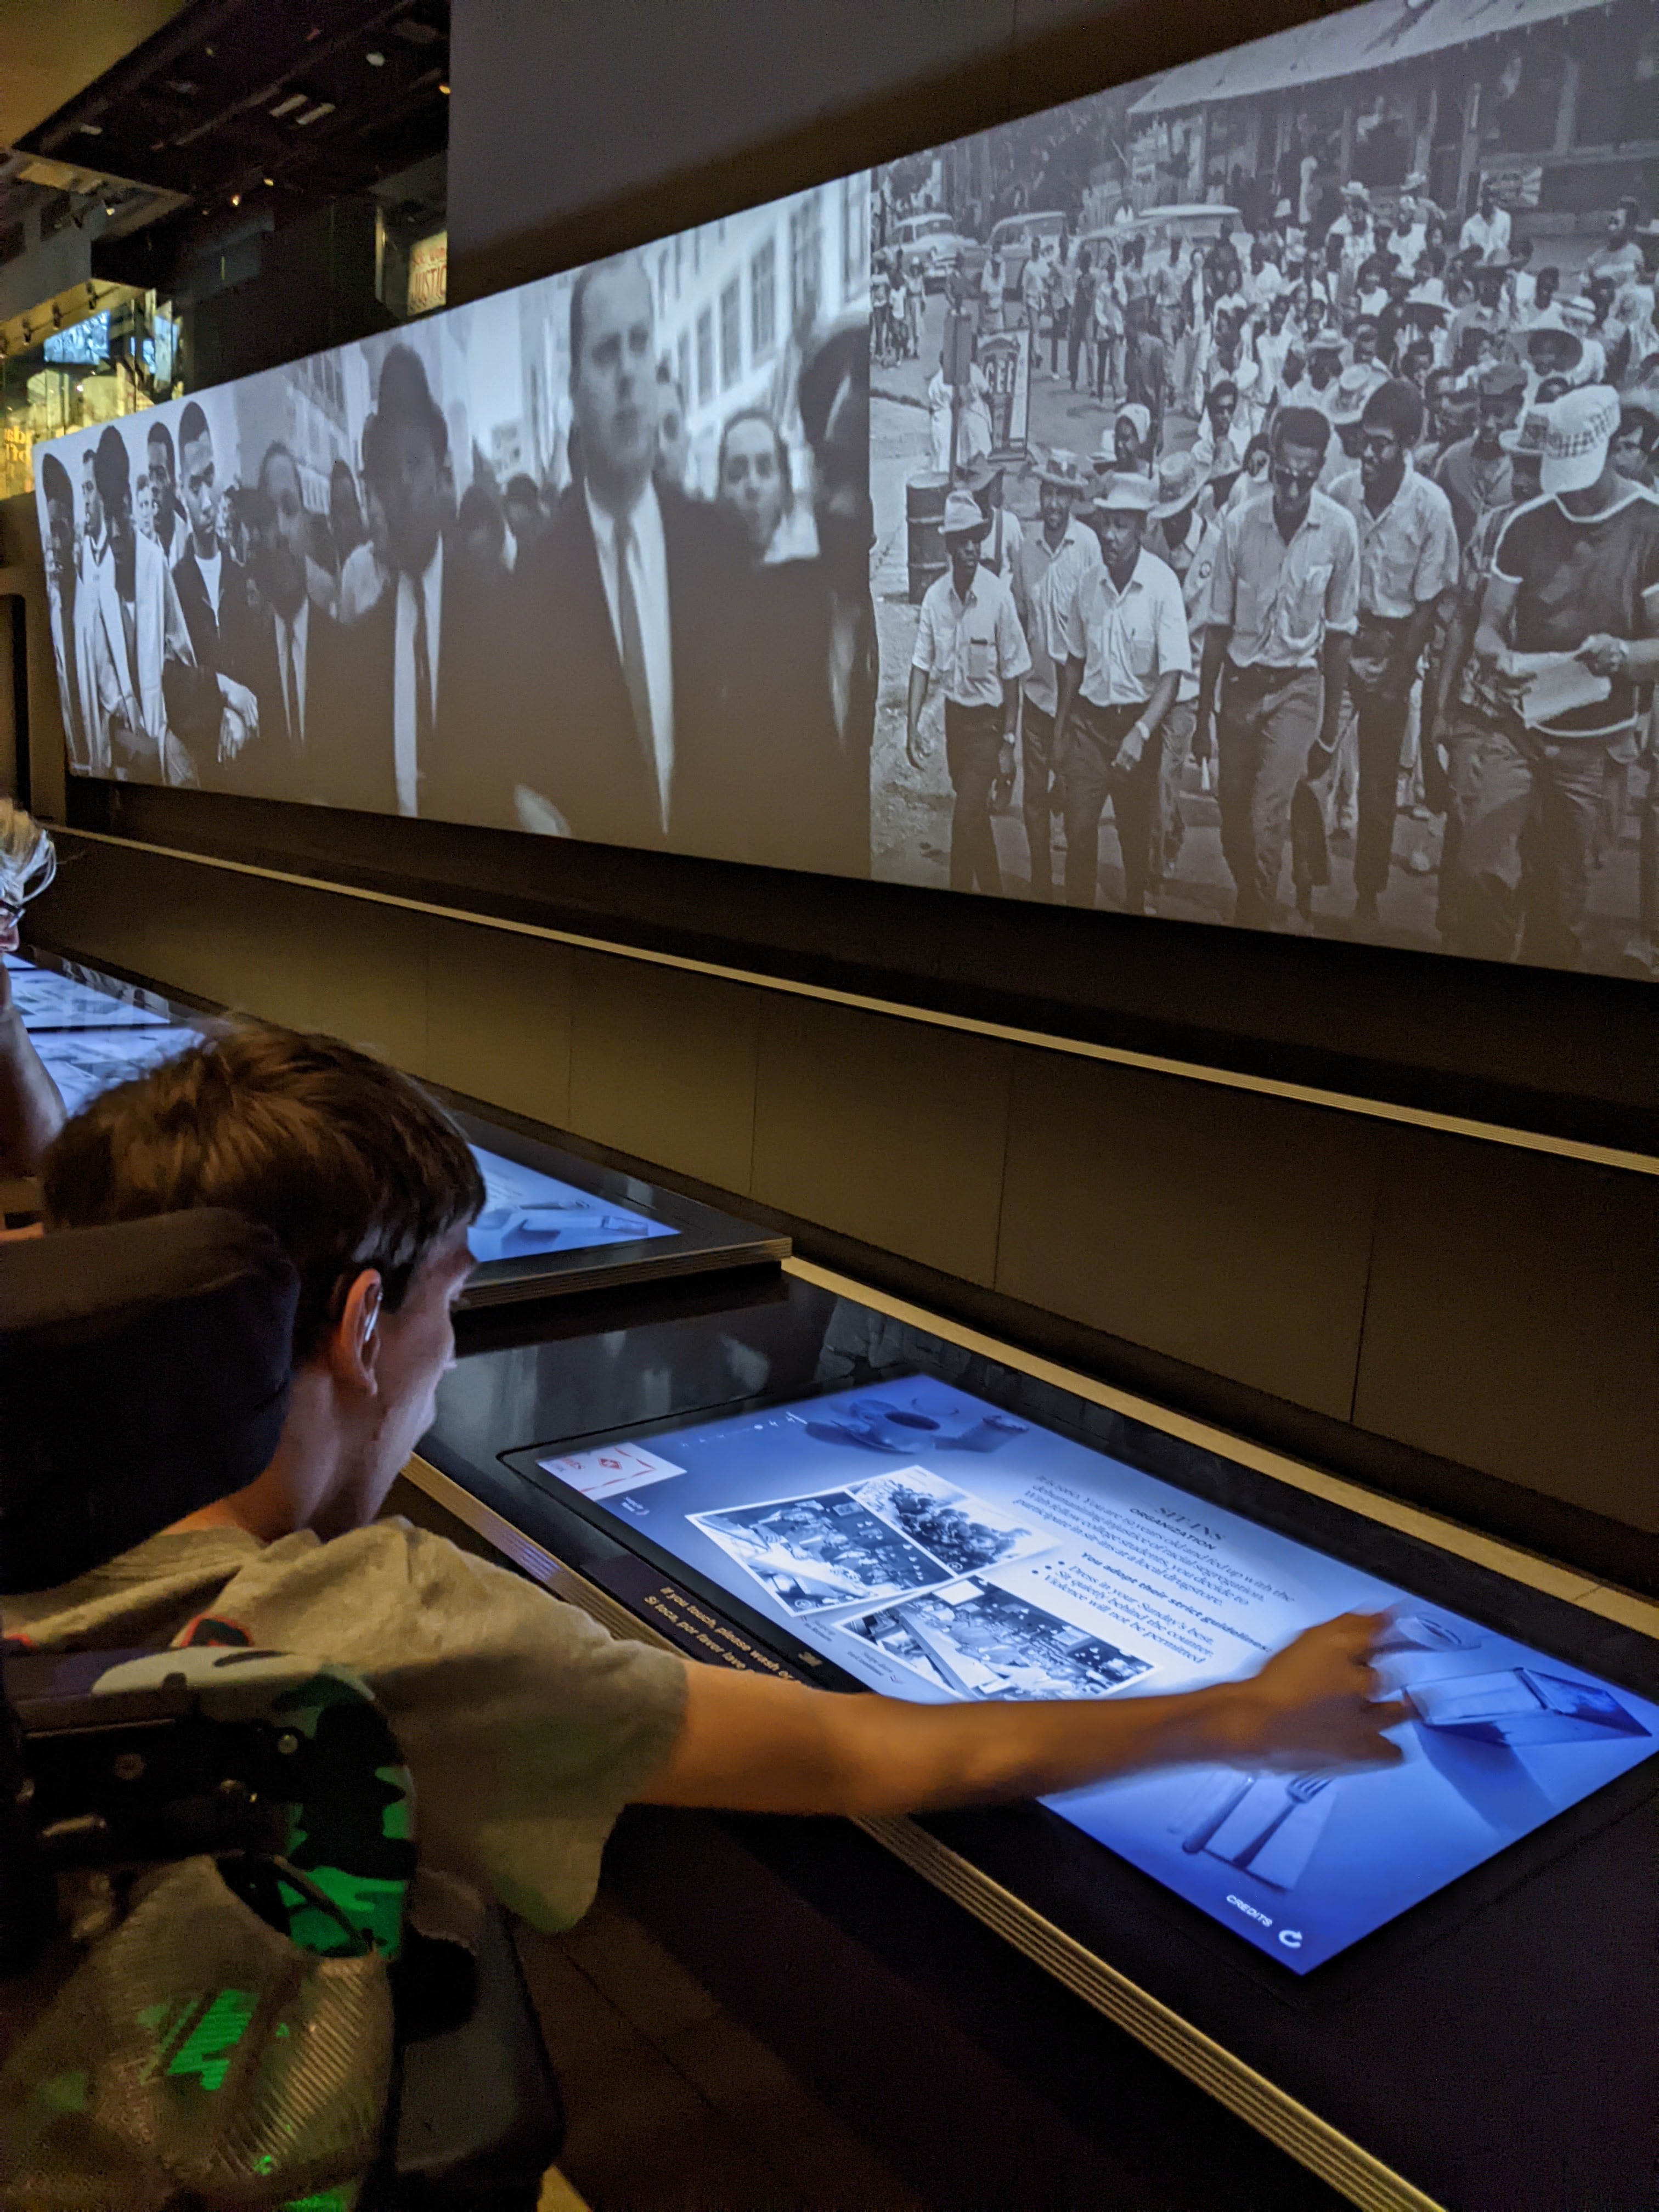 Young man in wheelchair looking at interactive monitor at exhibit with images on large screen from 1960s civil rights era